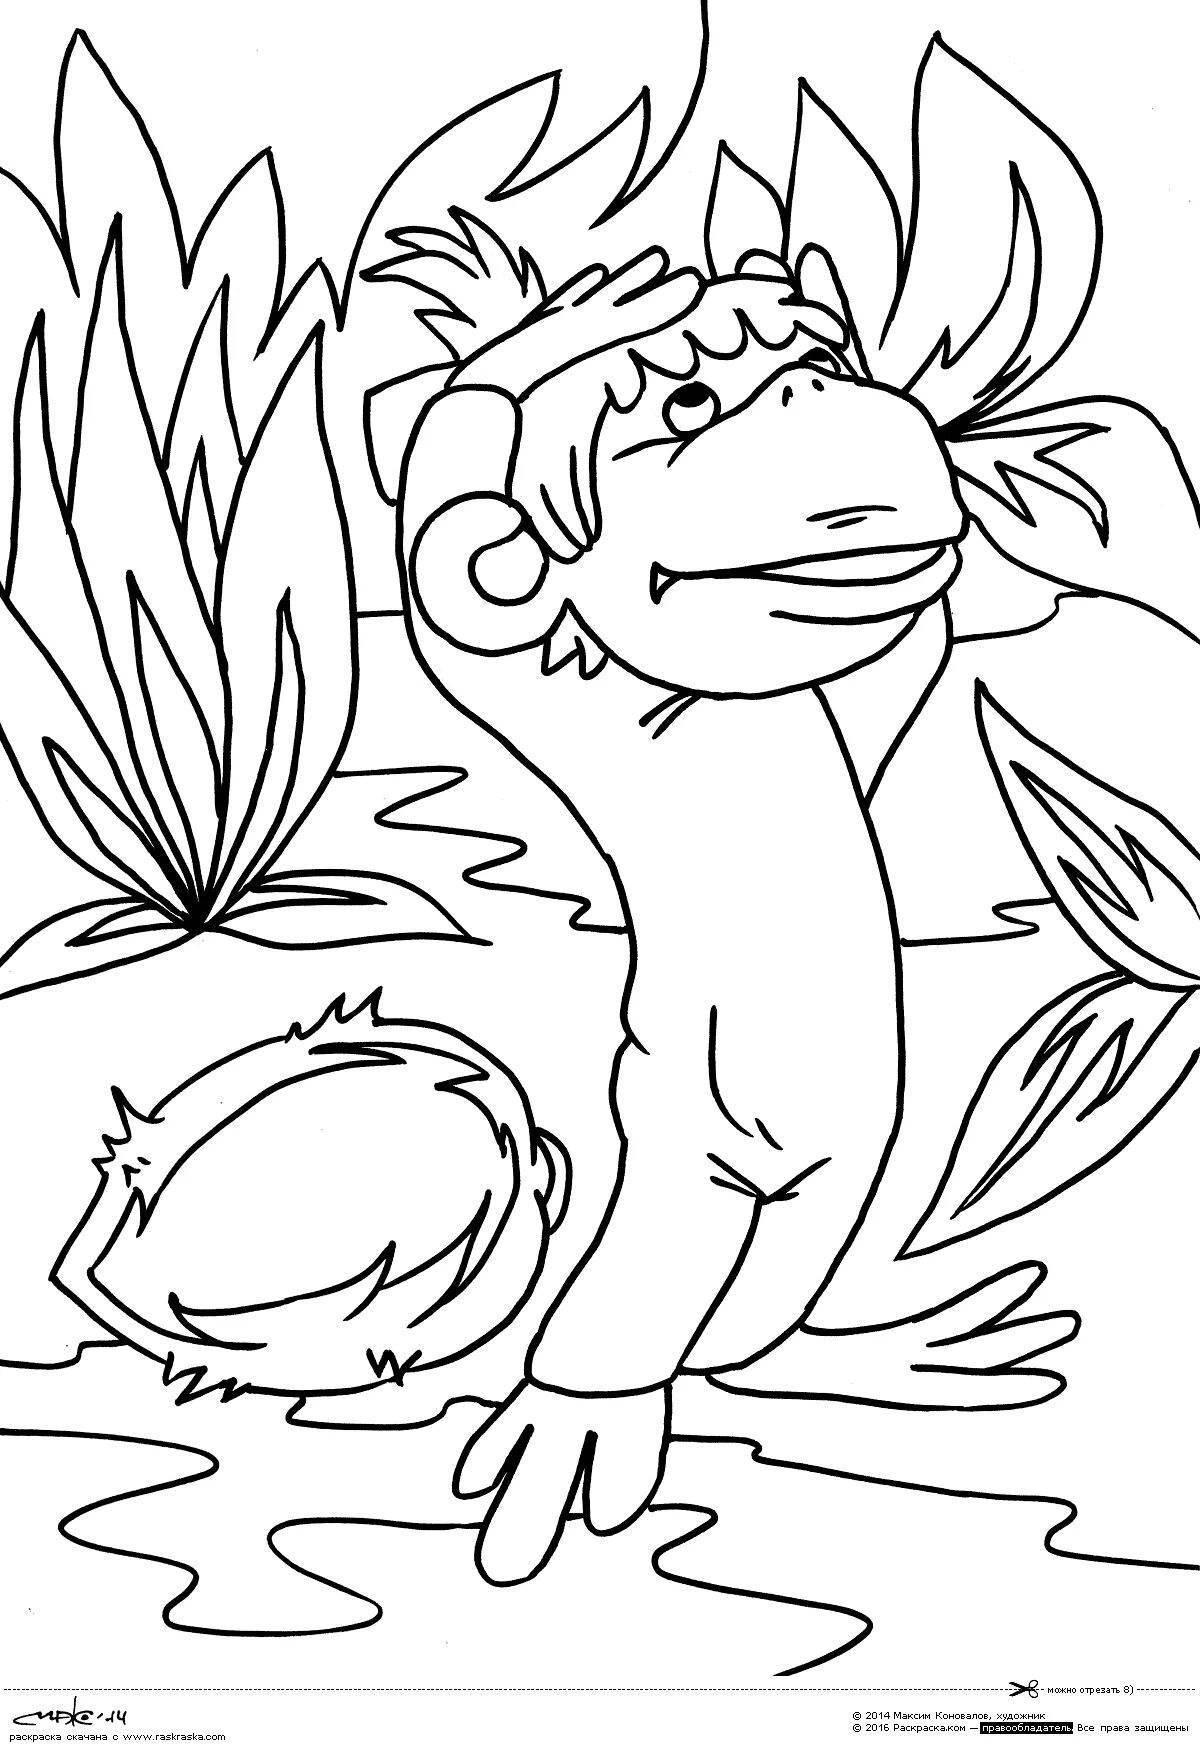 Humorous date cartoon coloring page